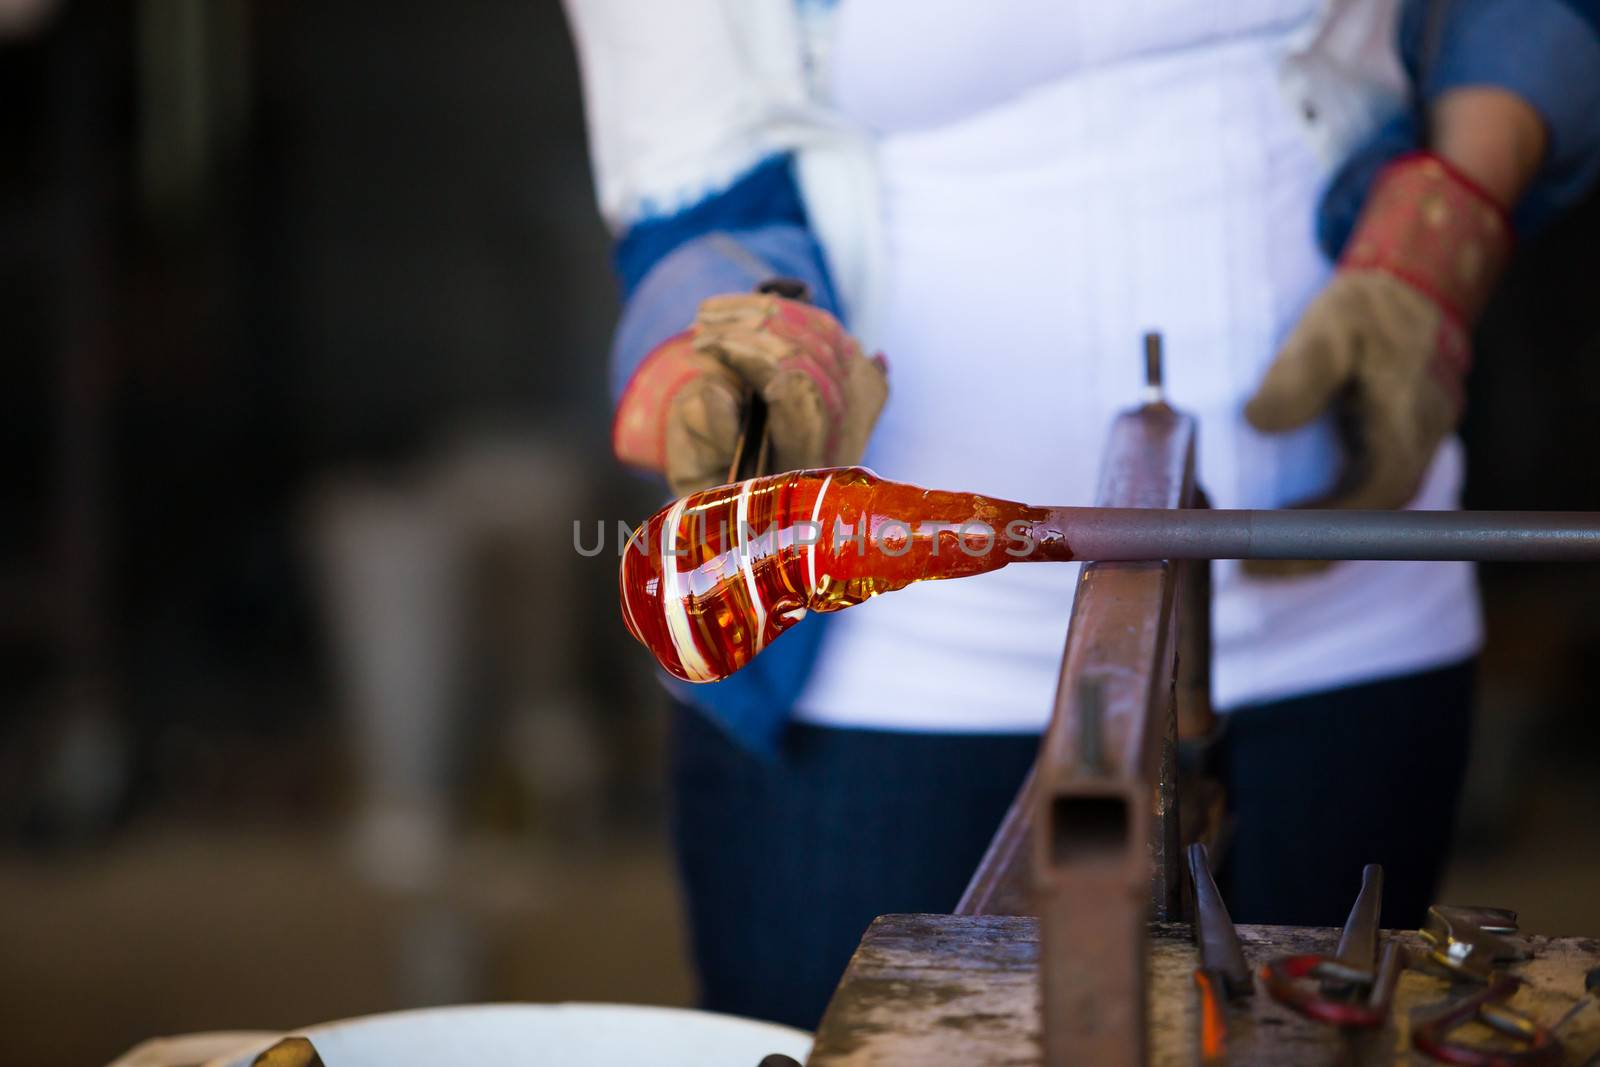 A female is blowing glass and using a wooden shaping tool to form the shape she wants the glass to end up as. The glass is hot and molten so she has to use water with the wood.